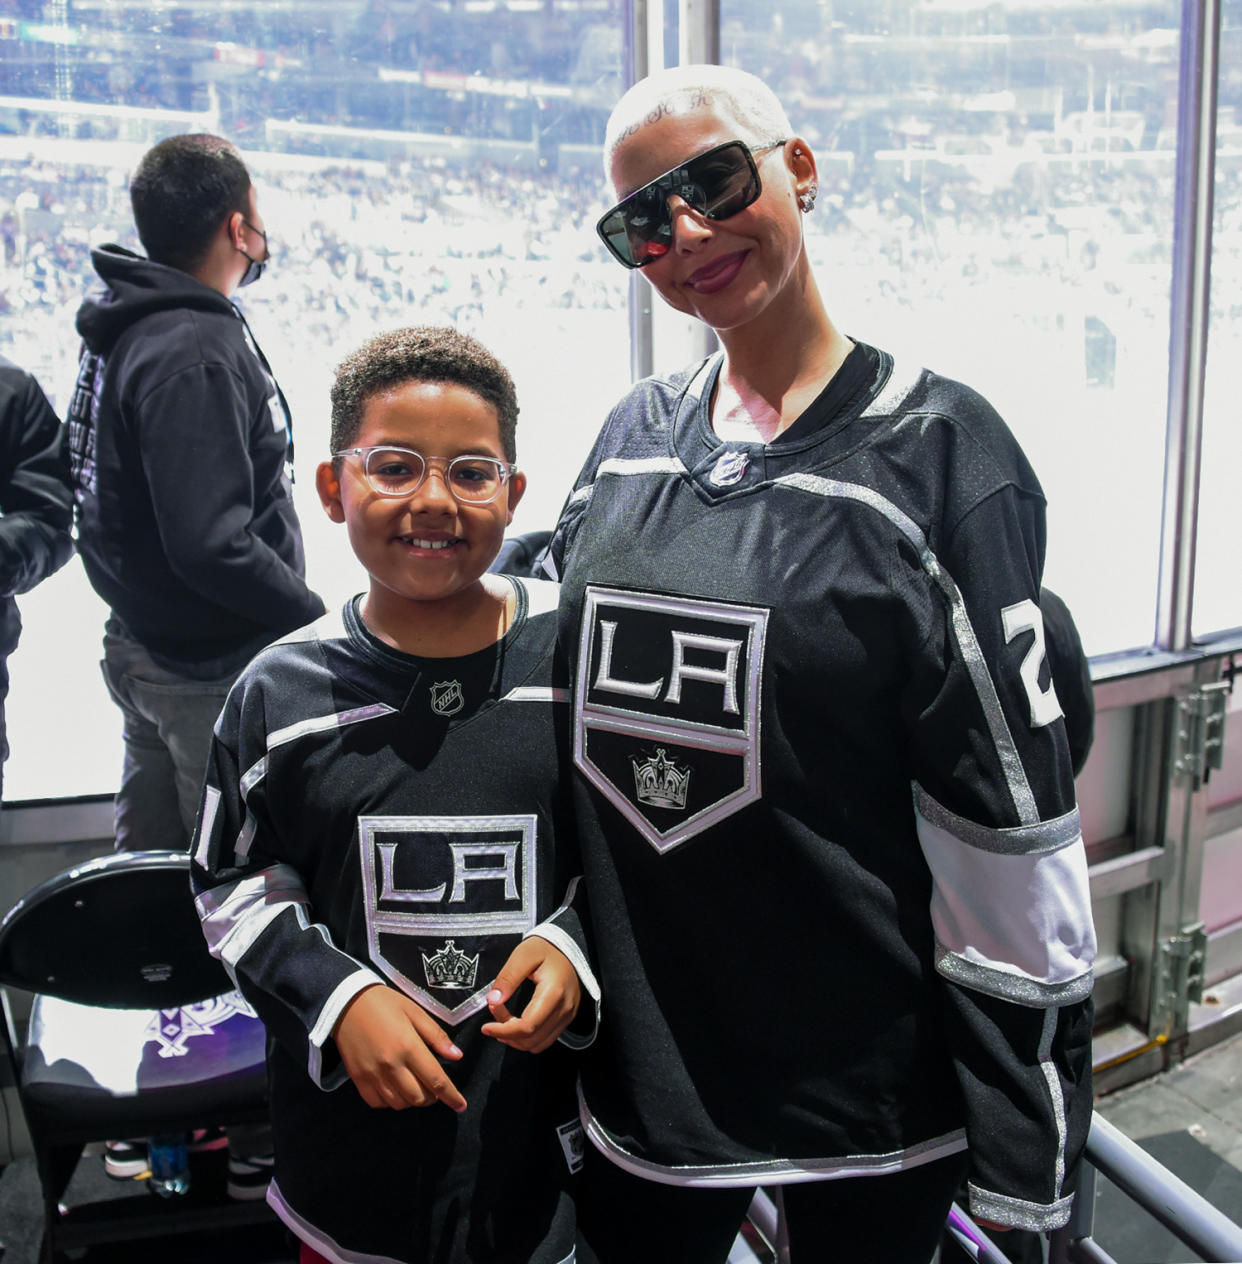 LOS ANGELES, CA - NOVEMBER 27: Amber Rose and son Sebastian Taylor Thomaz watch Los Angeles Kings game during the Second period against the Ottawa Senators at STAPLES Center on November 27, 2021 in Los Angeles, California.  (Photo by Juan Ocampo/NHLI via Getty Images)